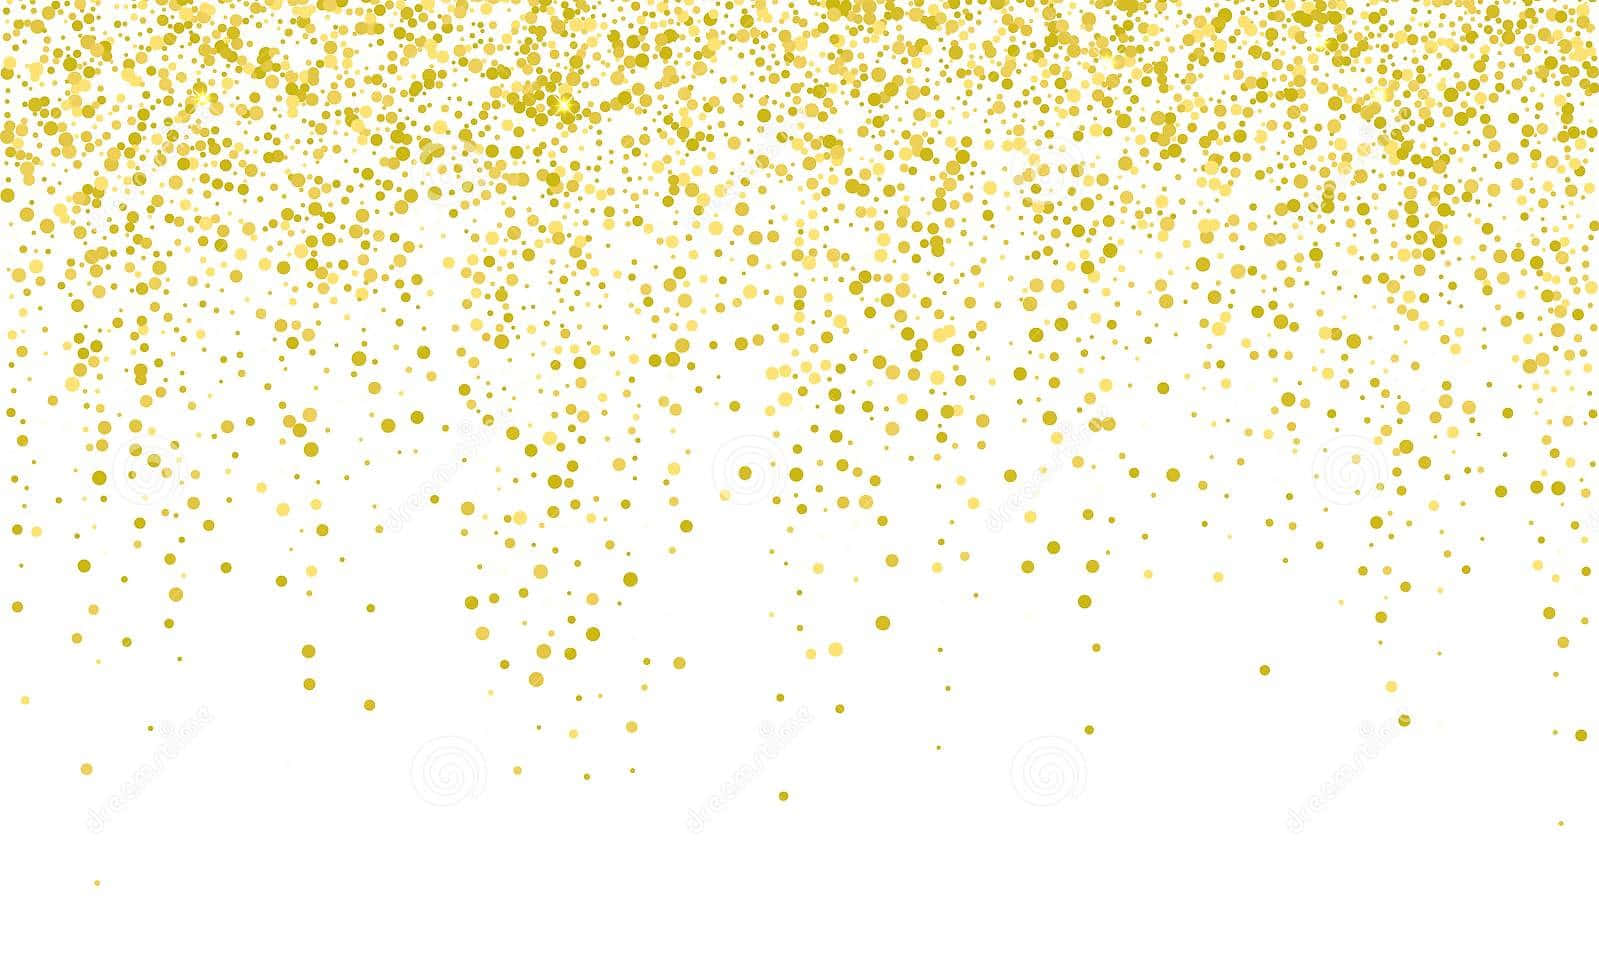 Light up the party with this beautiful and vibrant gold confetti background.